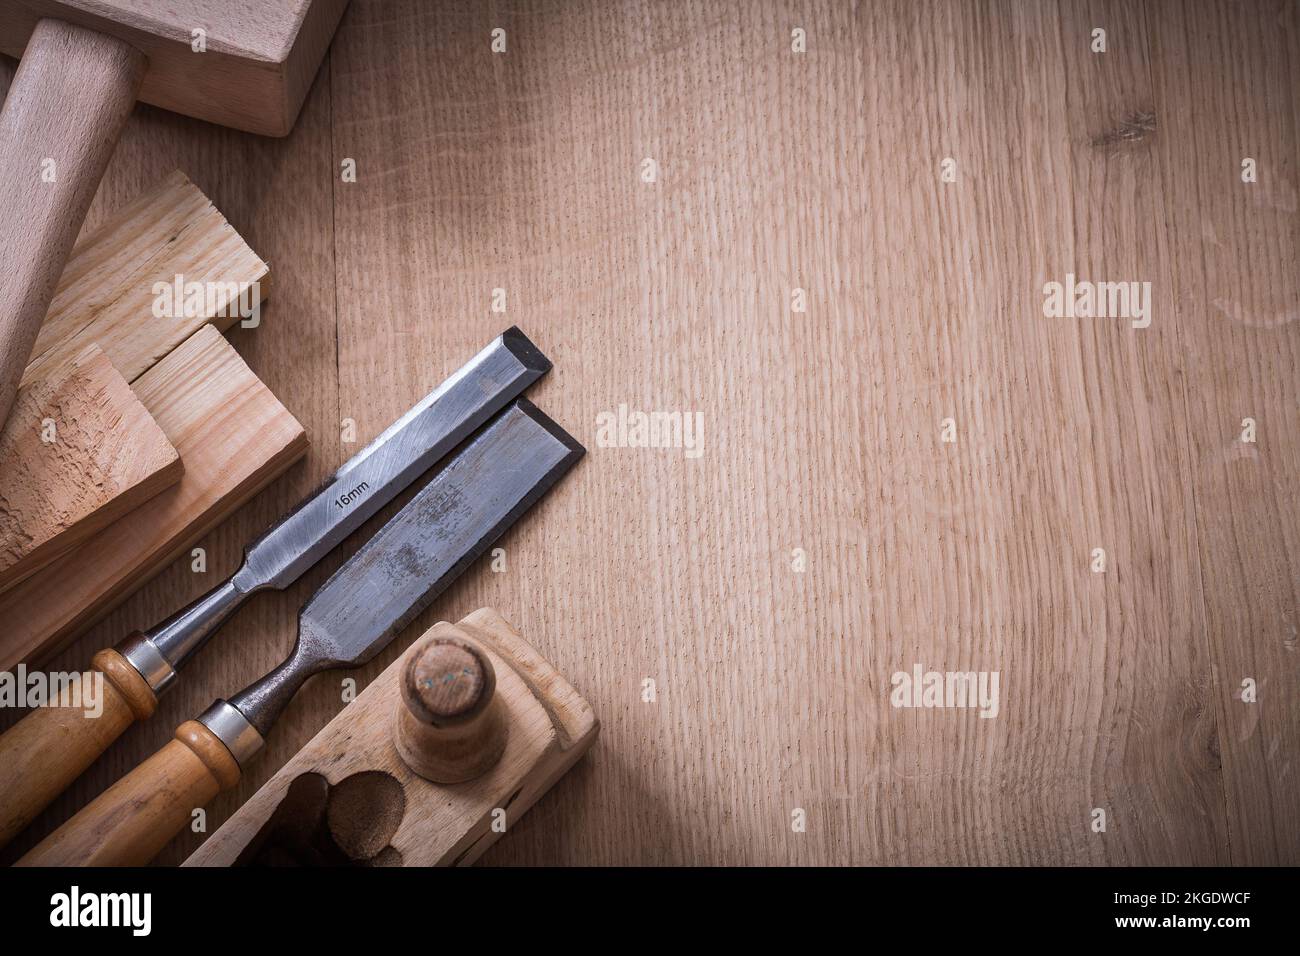 Copy space image of lump hammer planer metal firmer chisels and wooden stud on wood board construction concept. Stock Photo